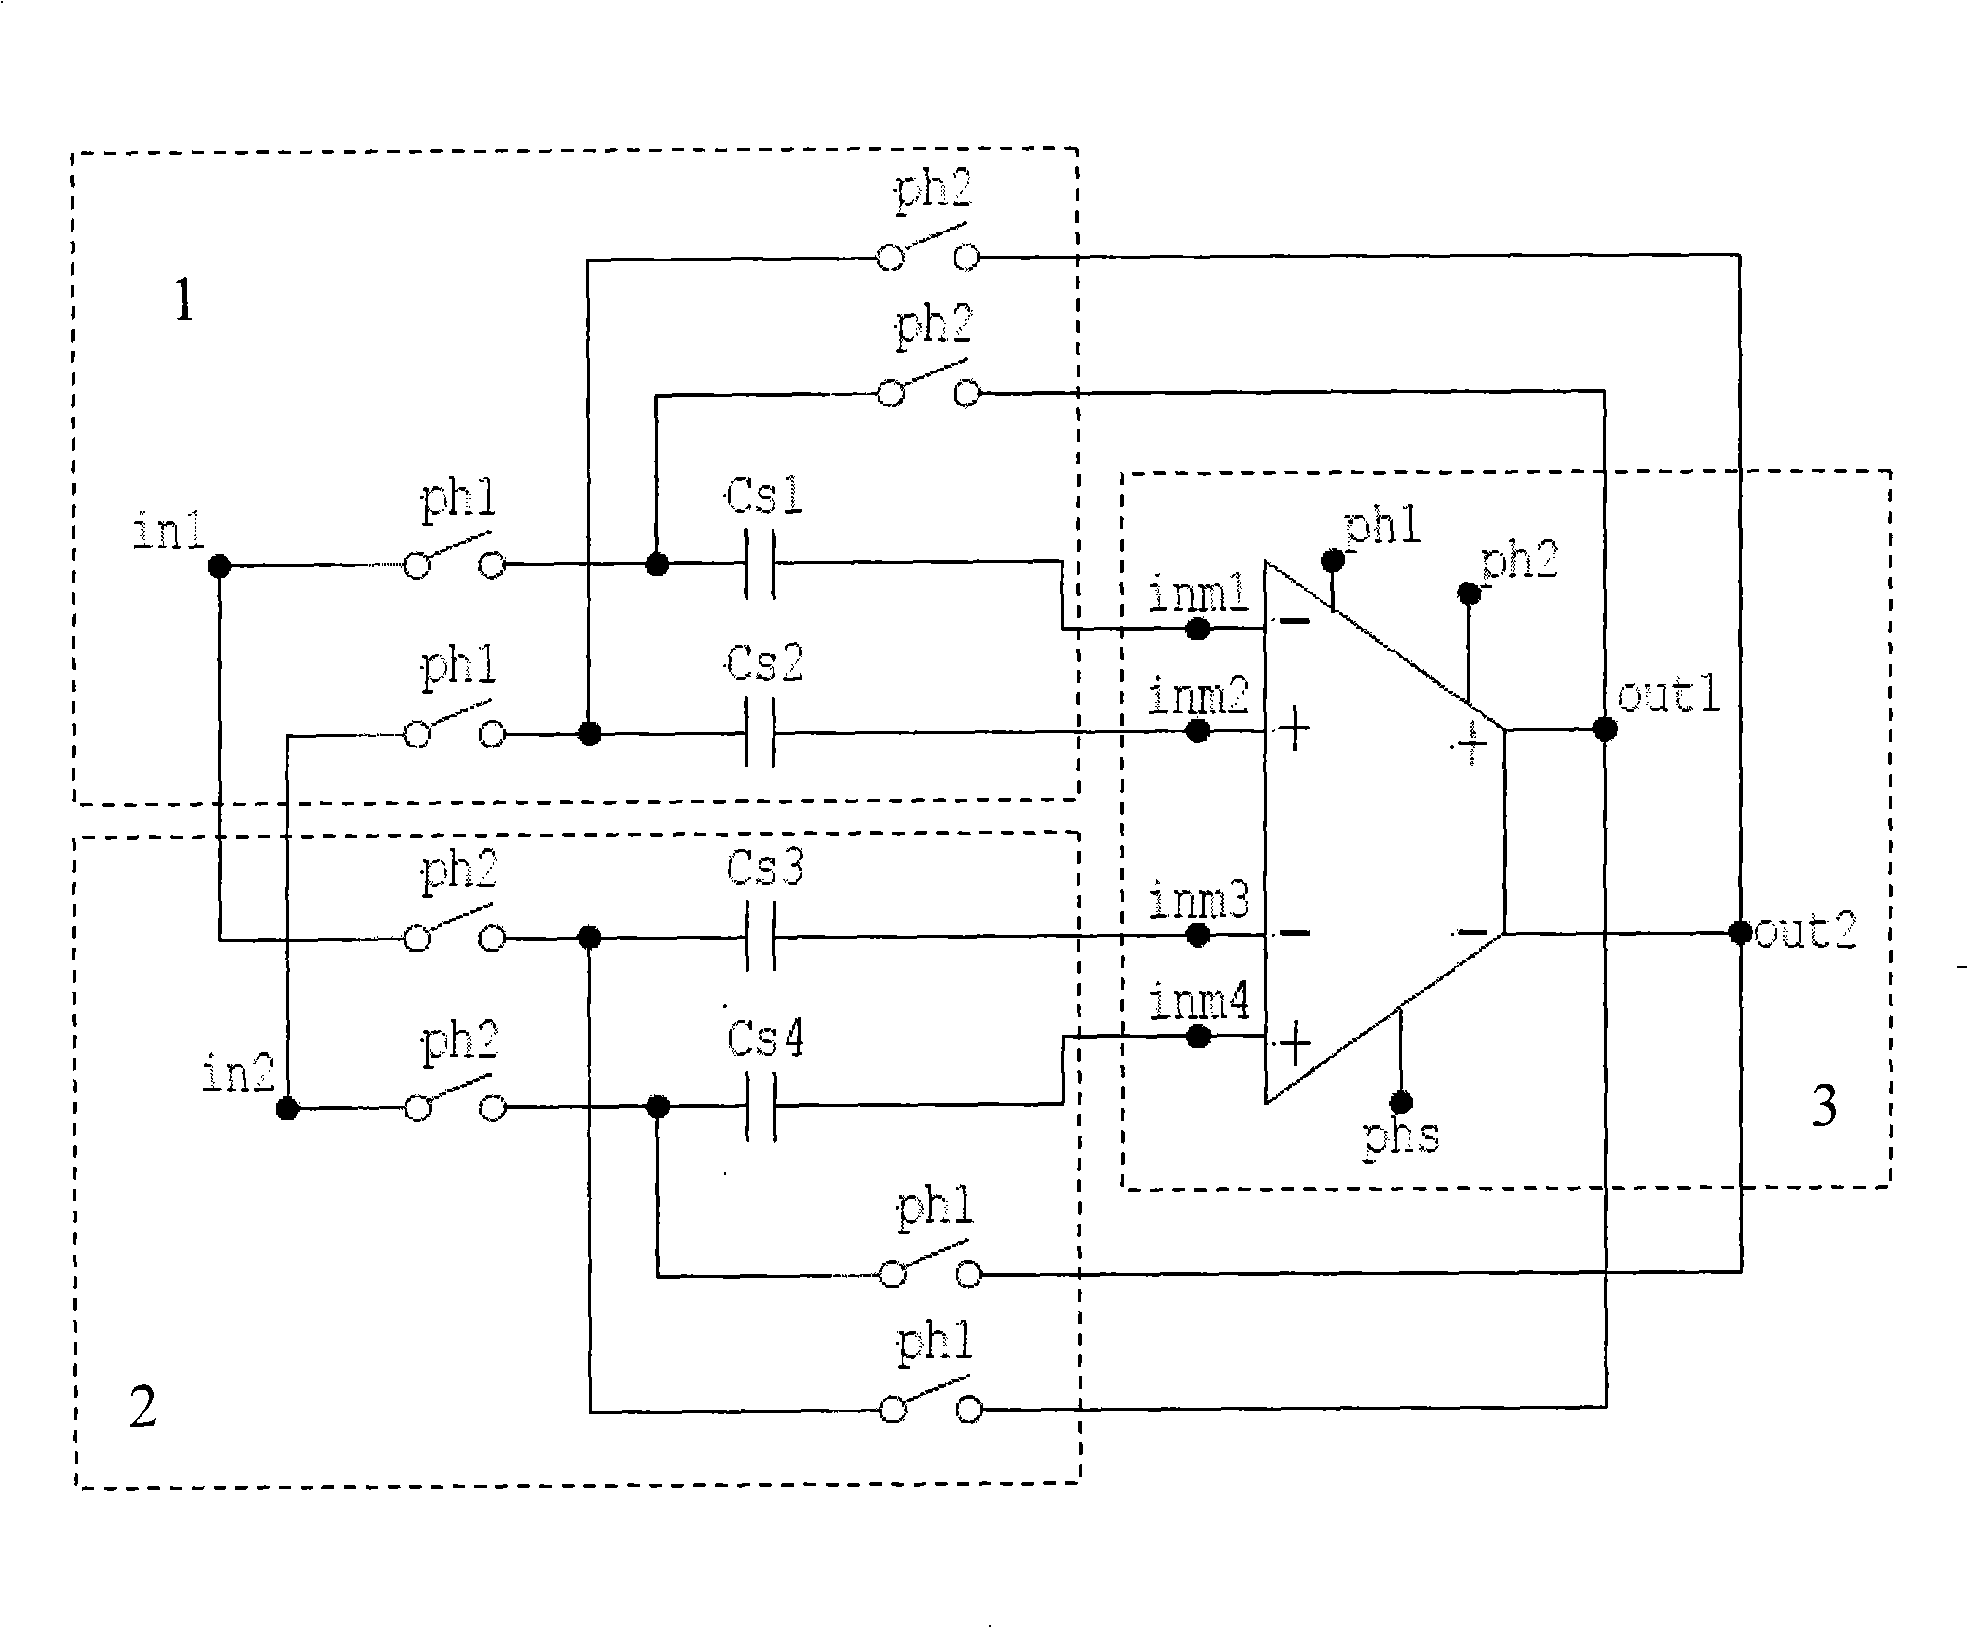 Double-sampling full-difference sampling-hold circuit